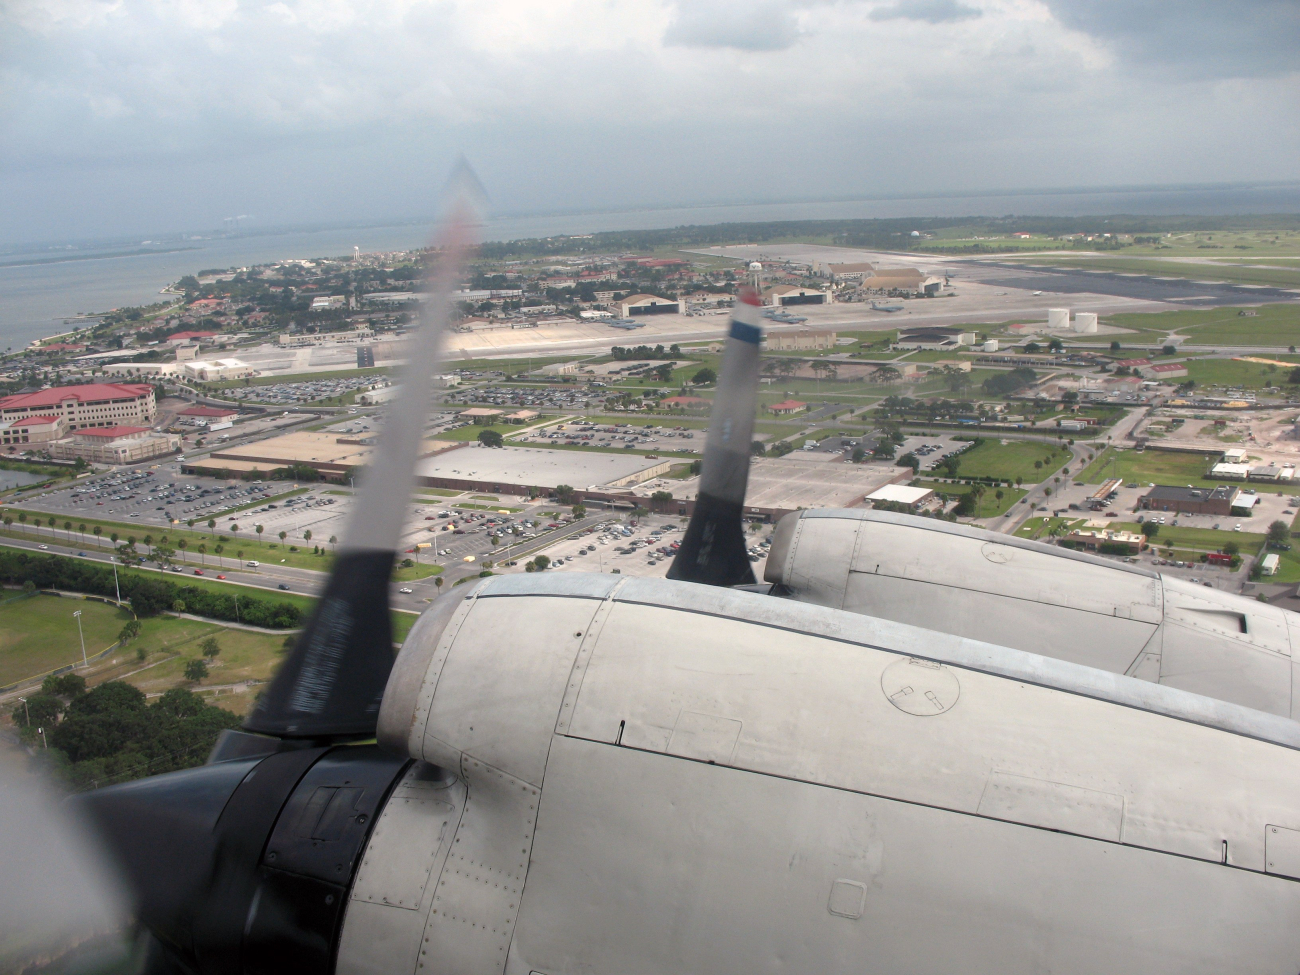 A view of MacDill Air Force Base in Tampa, home base of NOAA aircraft